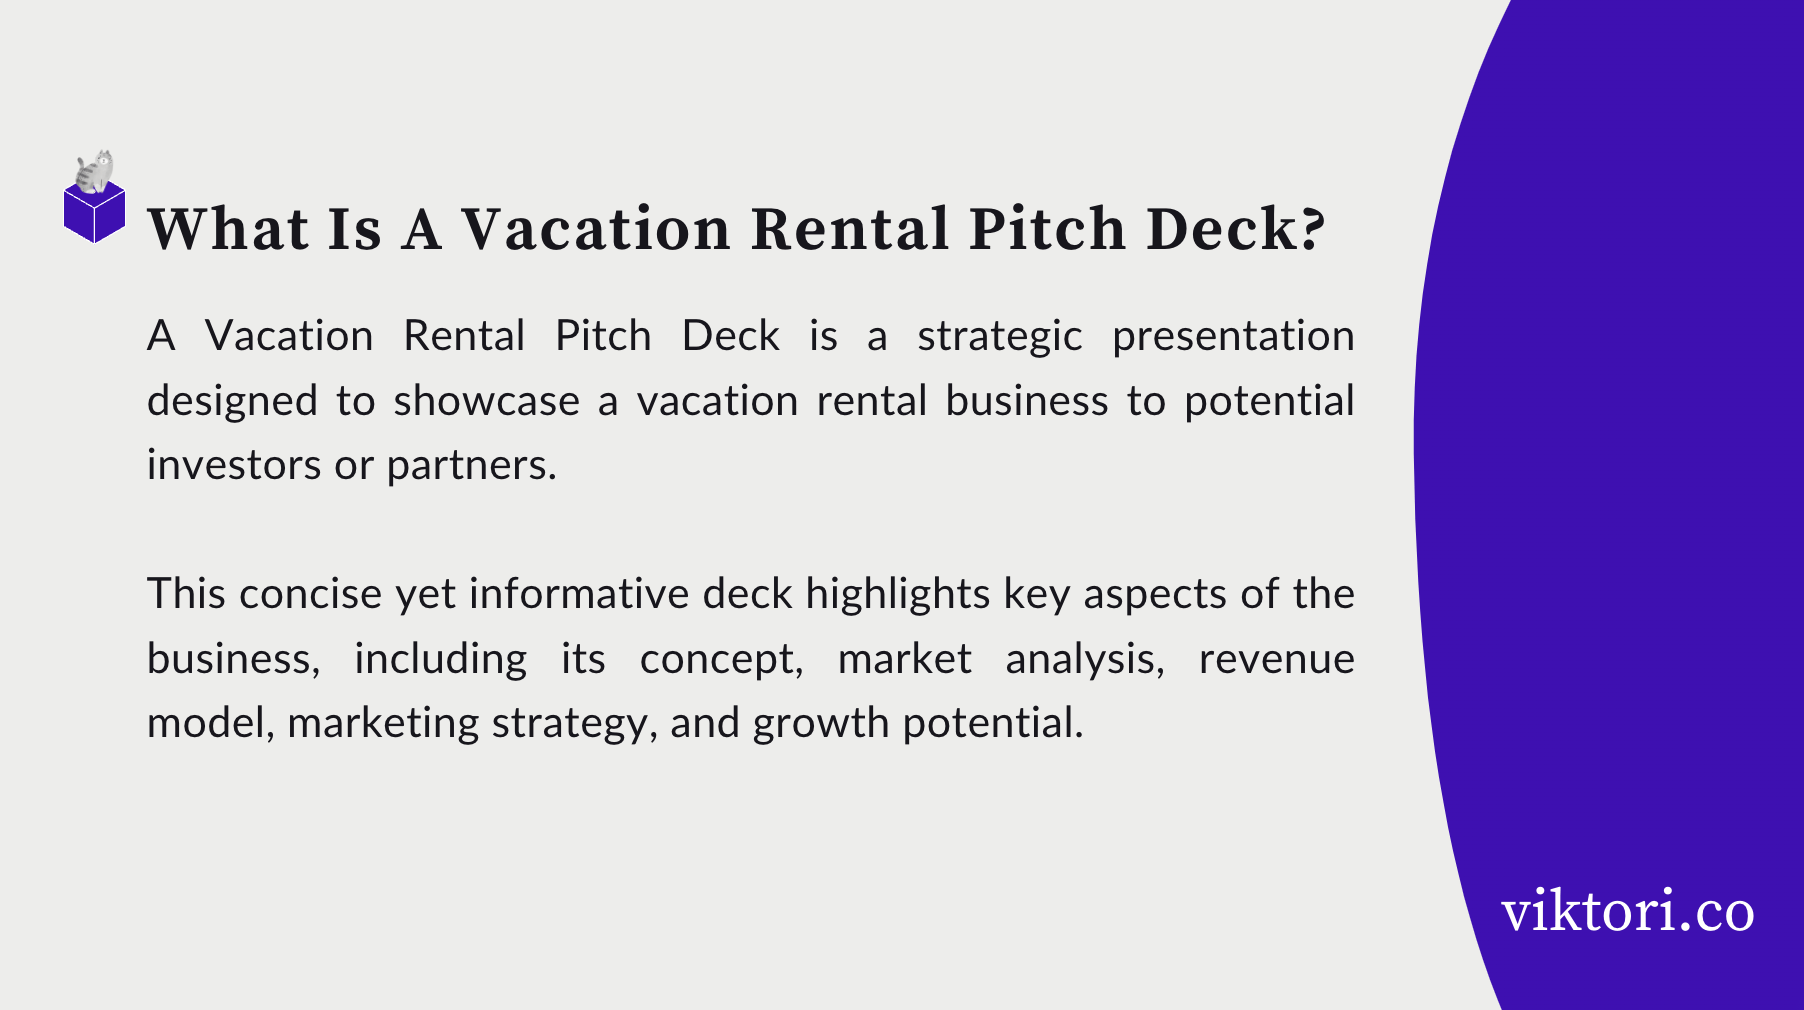 Vacation Rental Pitch Deck guide